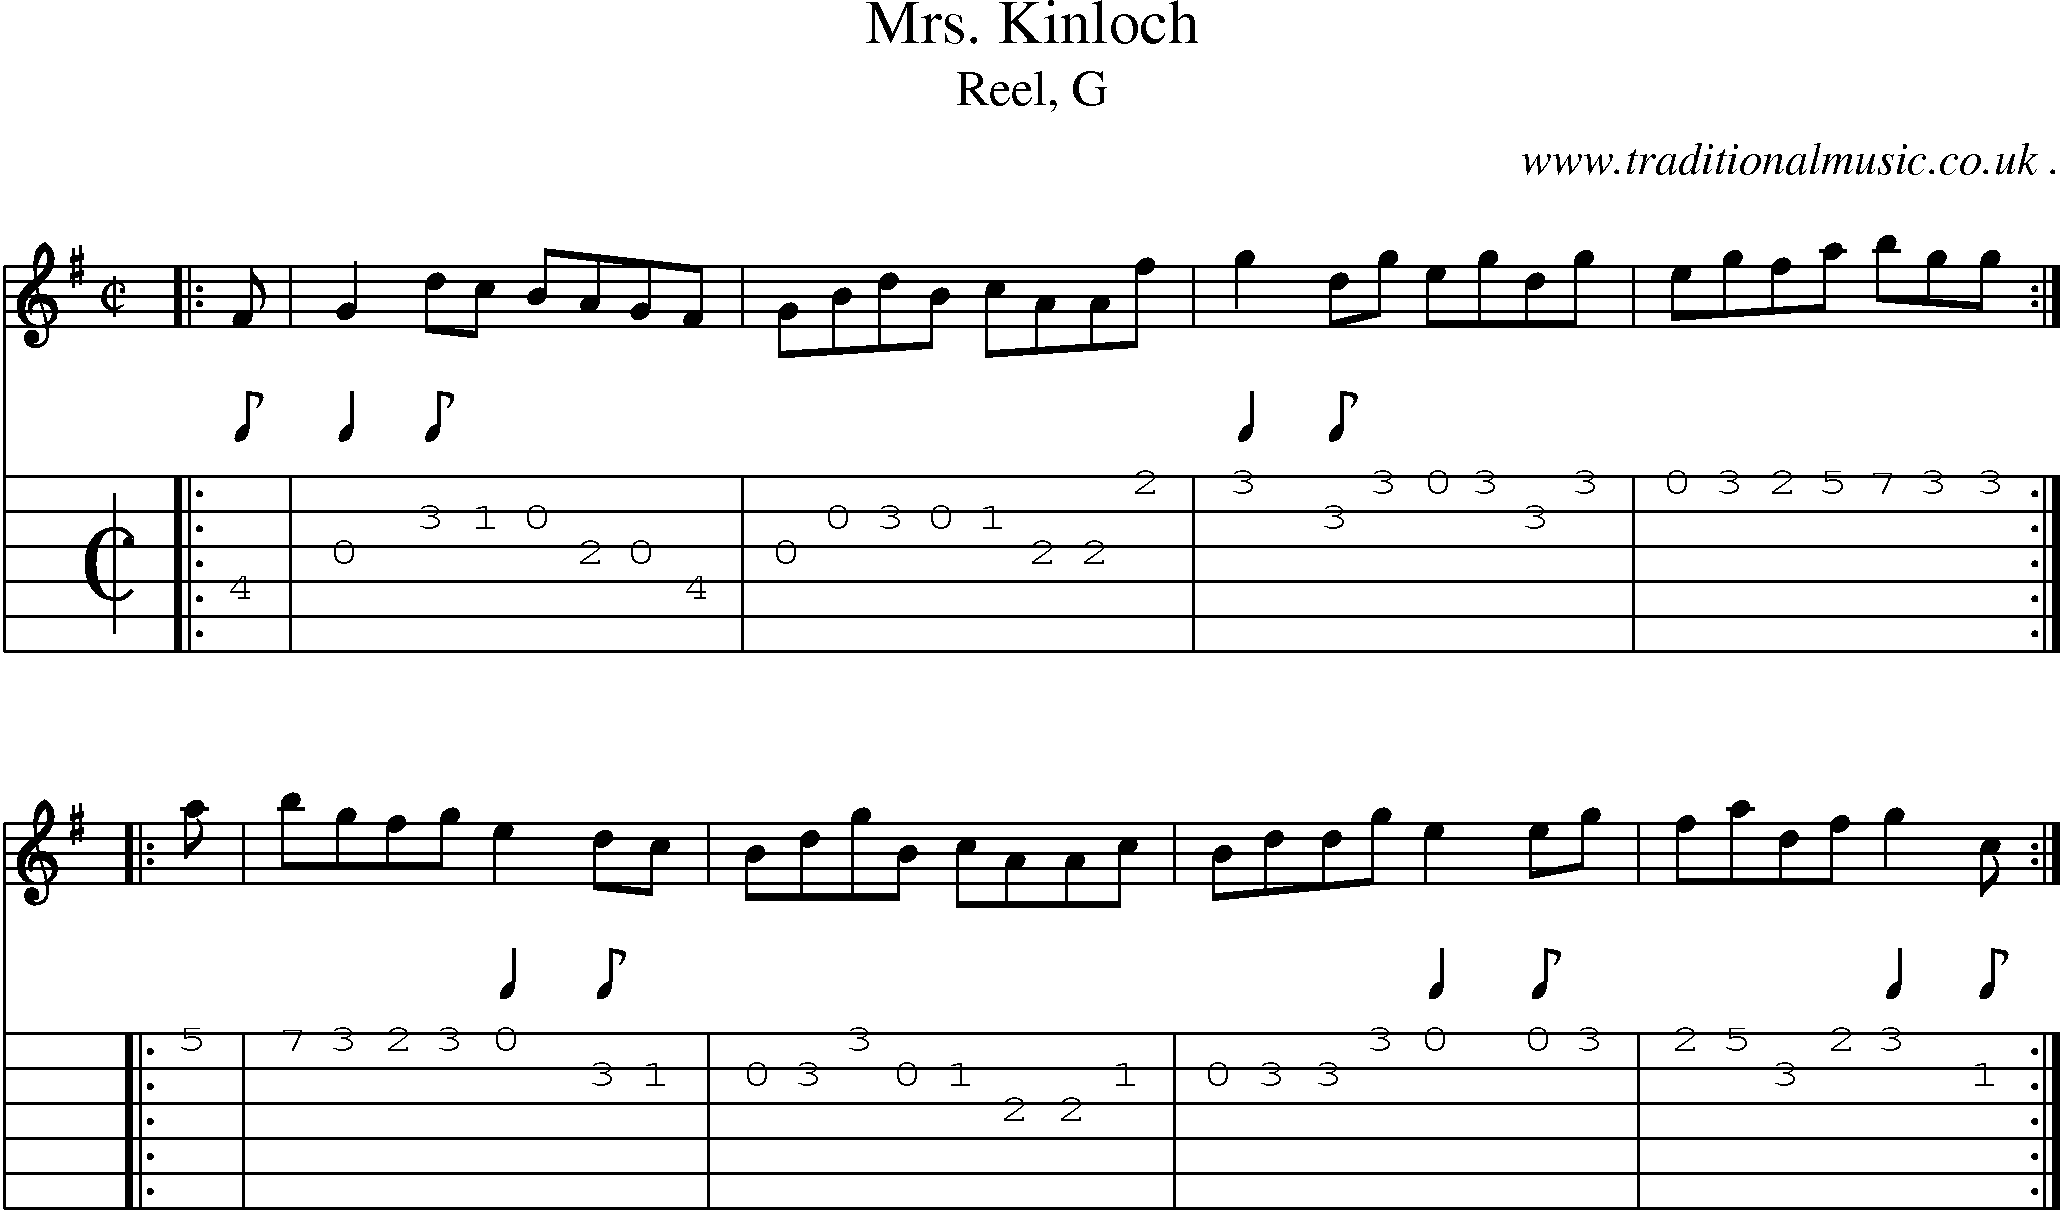 Sheet-music  score, Chords and Guitar Tabs for Mrs Kinloch